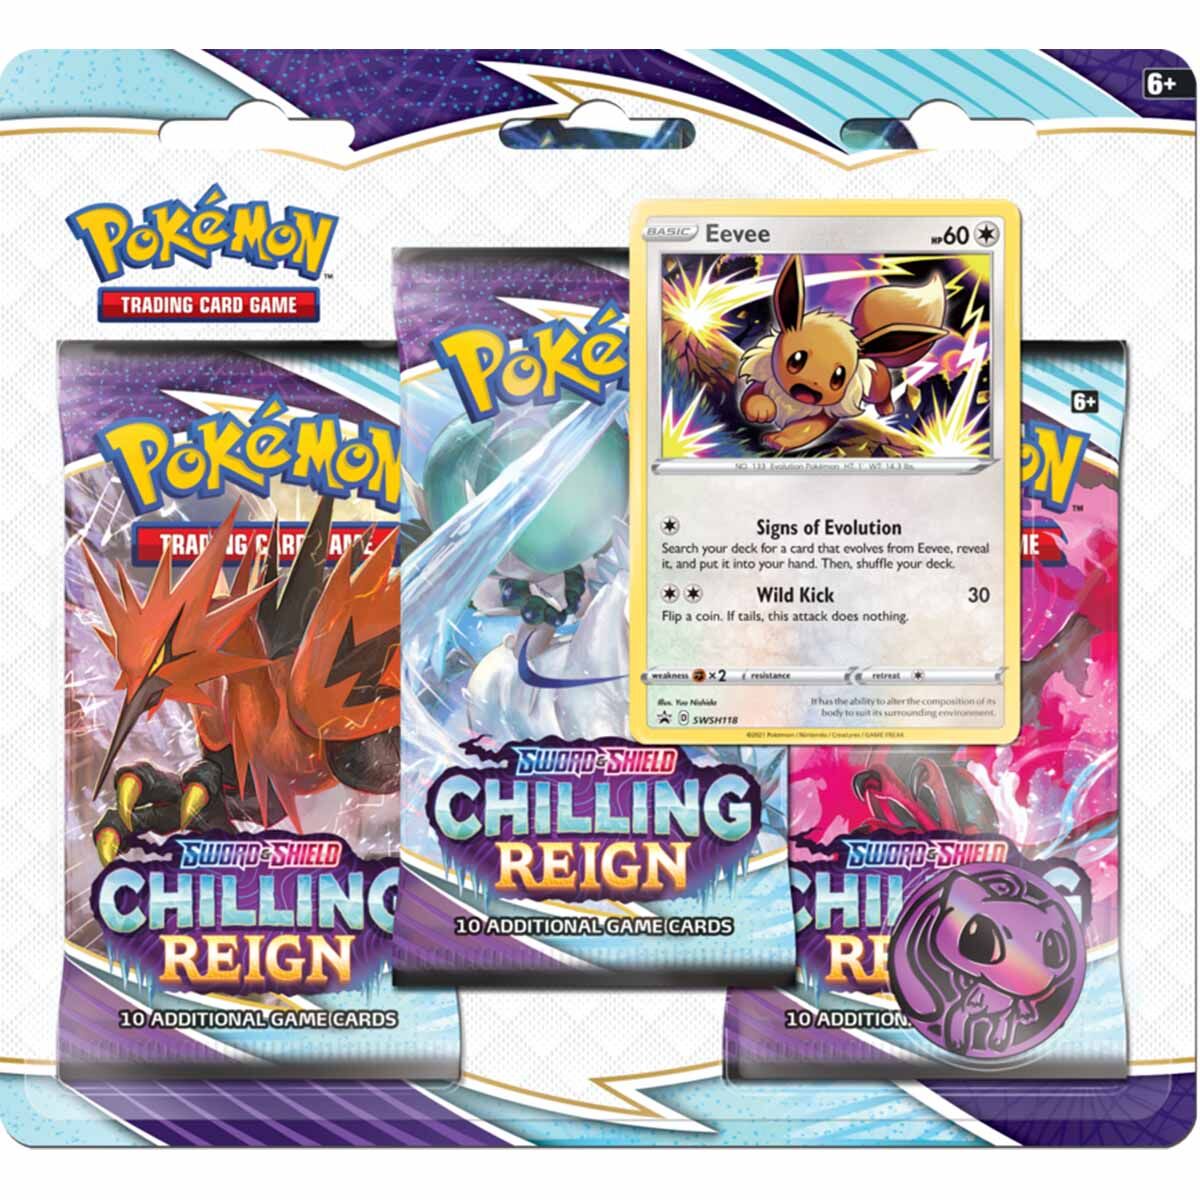 Pokémon Sword & Shield Chilling Reign Eevee Collection Blister